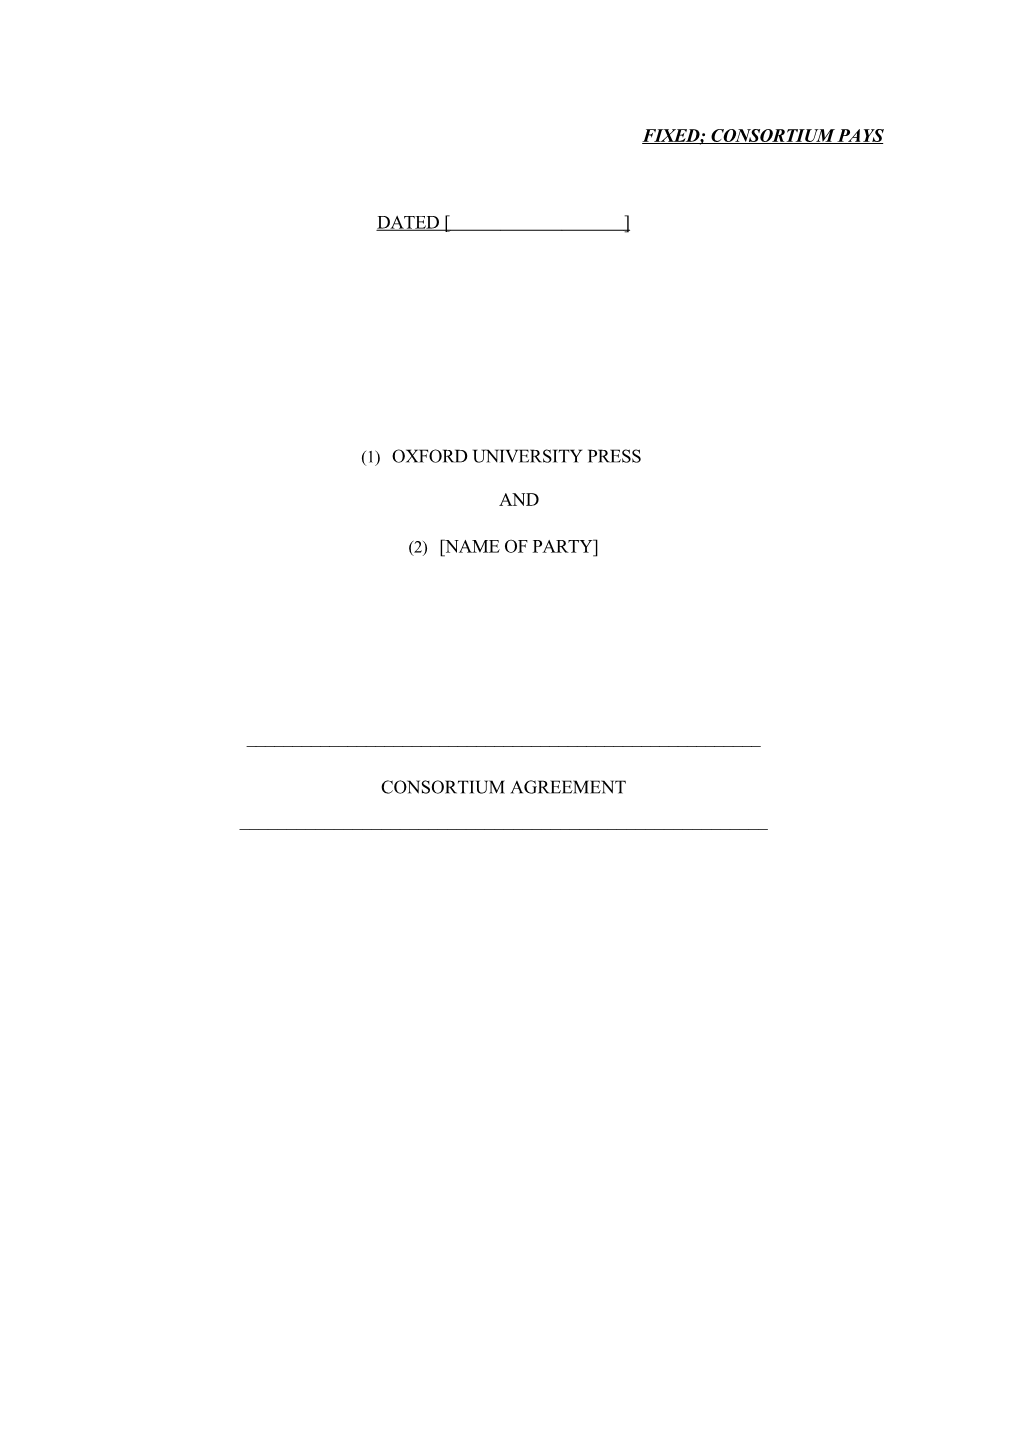 OUP Legal Standard Agreement Template